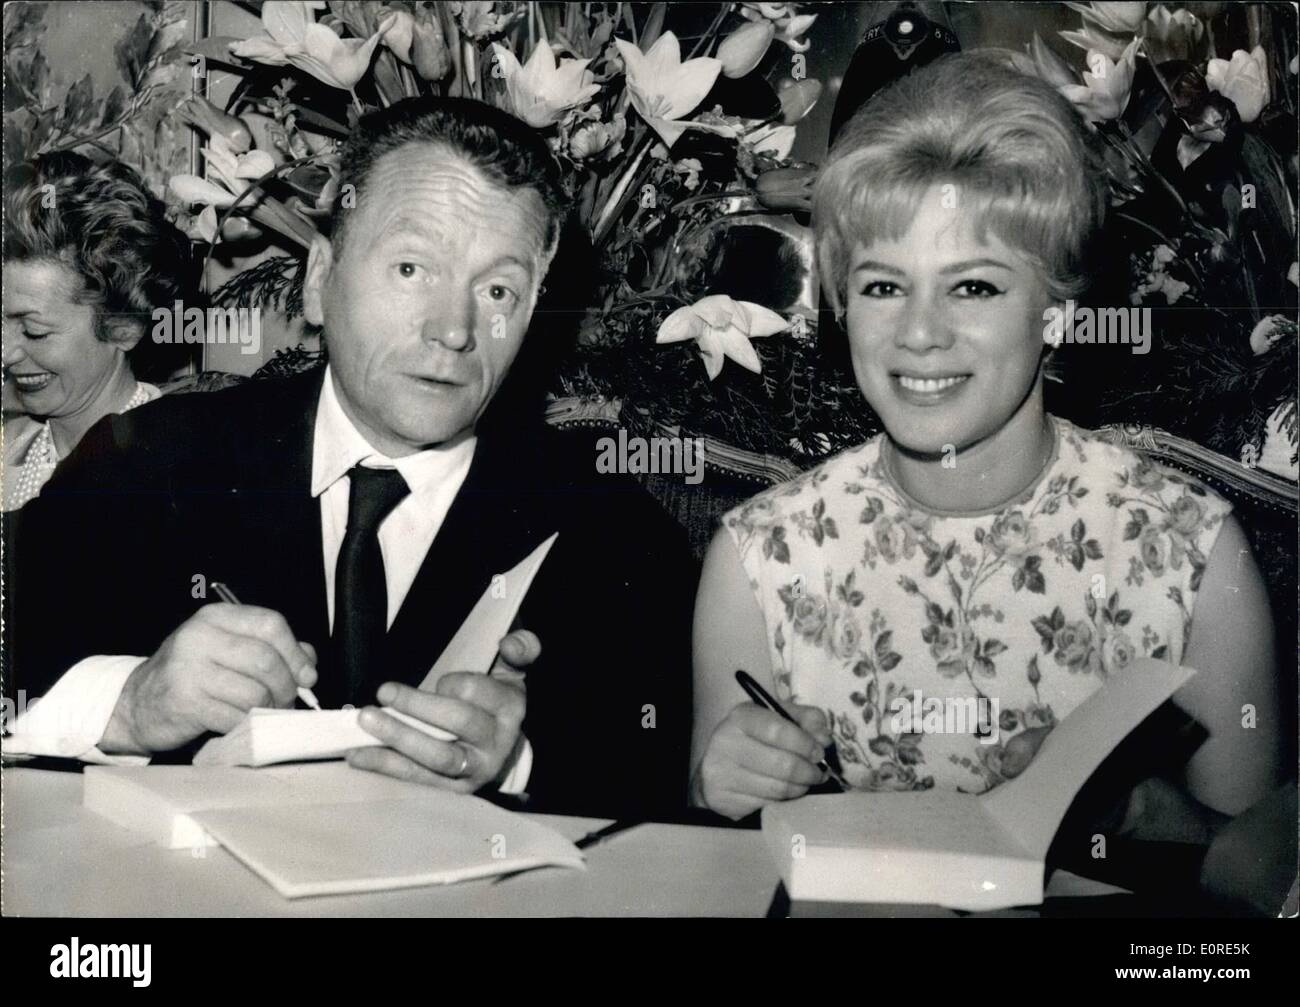 Apr. 04, 1959 - Sportsman and Author. Gilbert Prouteau, The well known French author and sportsman (FRENCH CHAMPION OF TRIPLE JUMP) autographed his new book ''The fear of women '' at his paris publisher's today. OPS Gilbert Prouteau autographic his book. Next to him the cinema actress Dora Doll Stock Photo